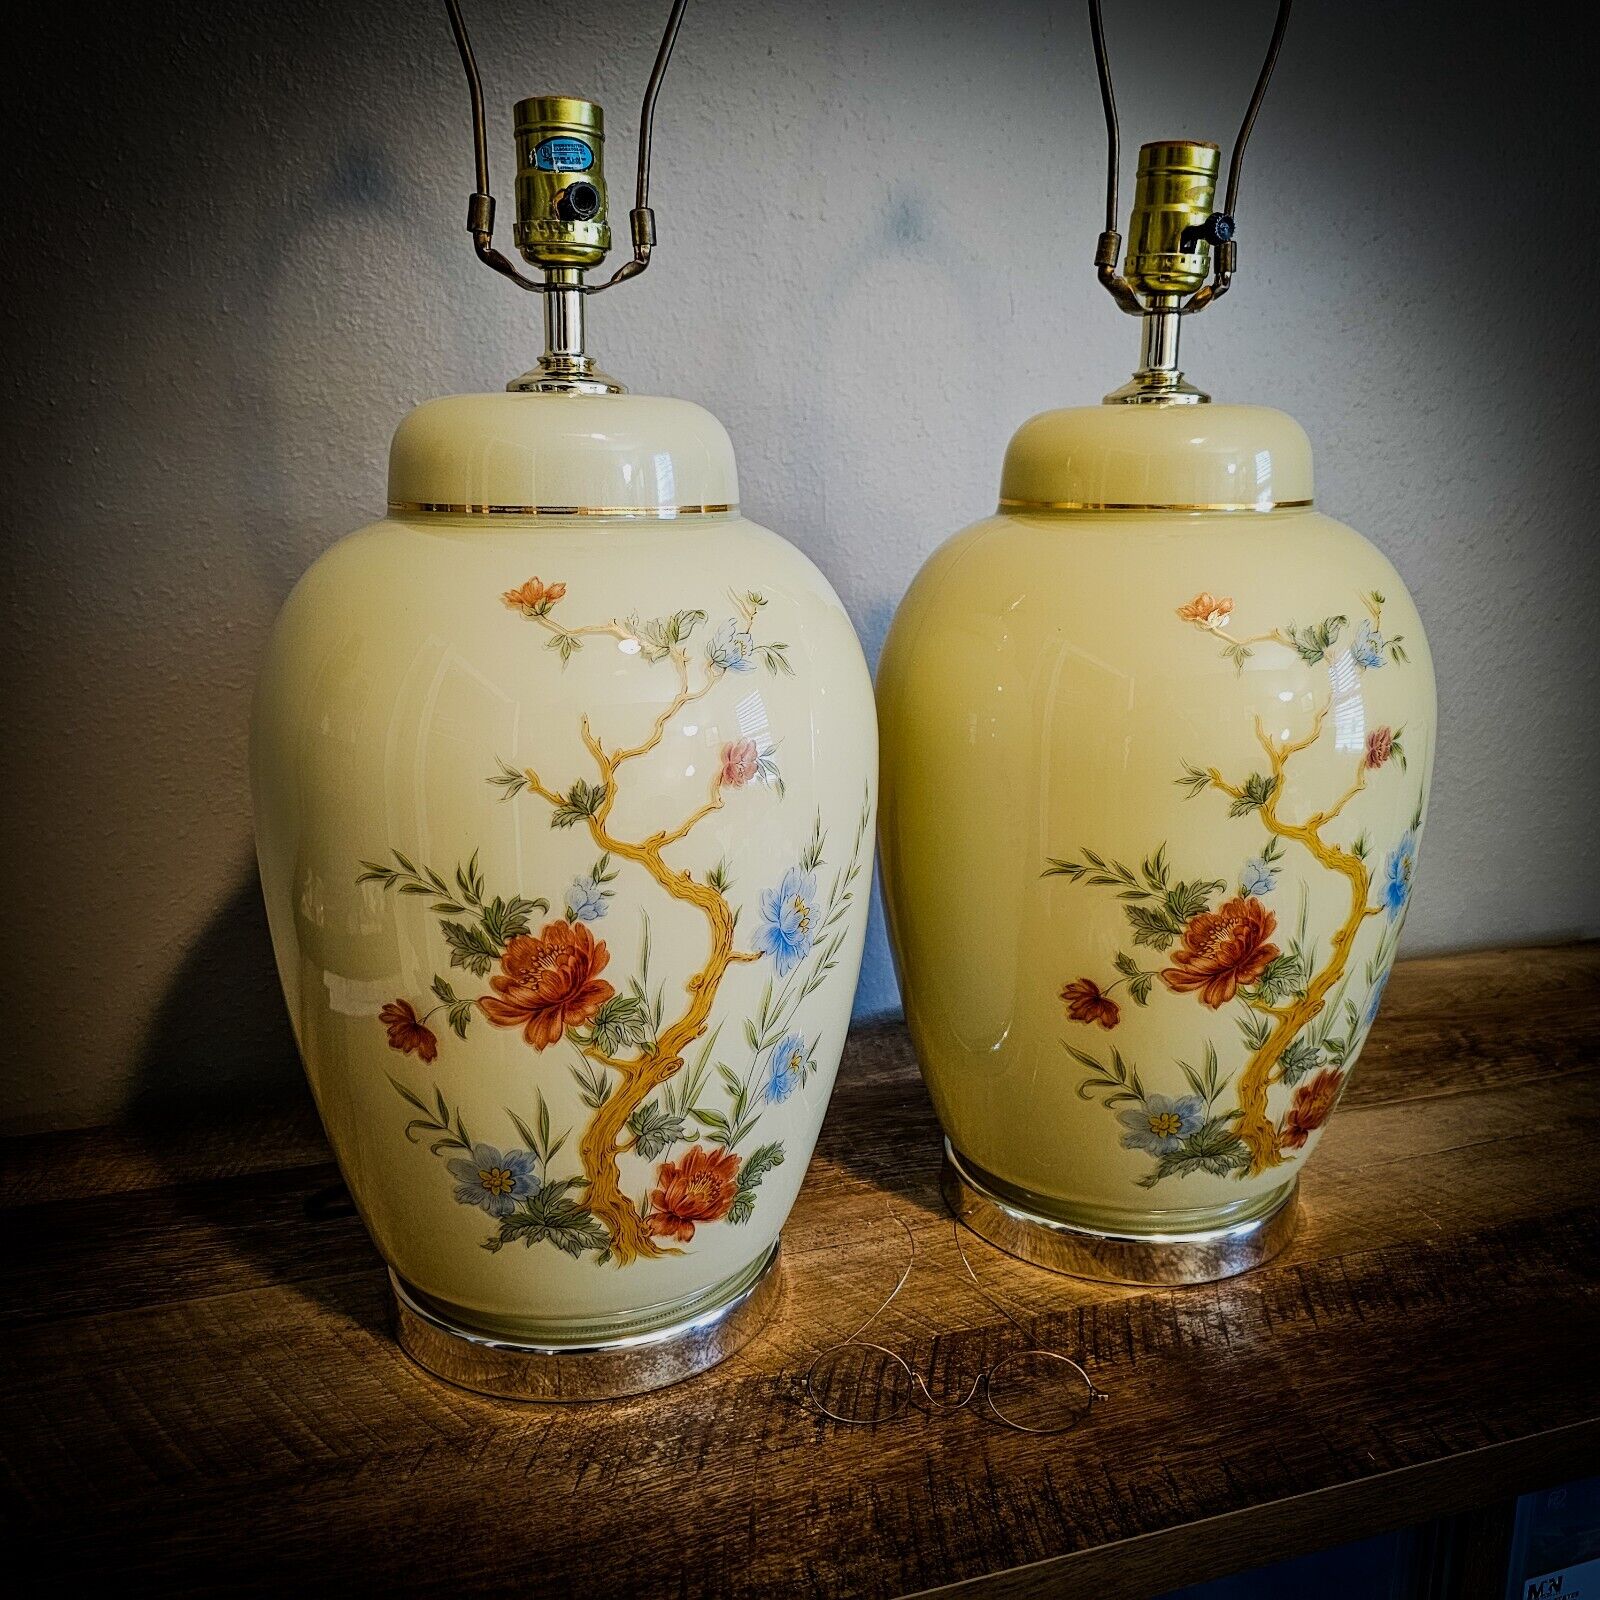 Pair of Vintage Chinese Ginger Jar Lamps Hand Painted Large Porcelain Beige